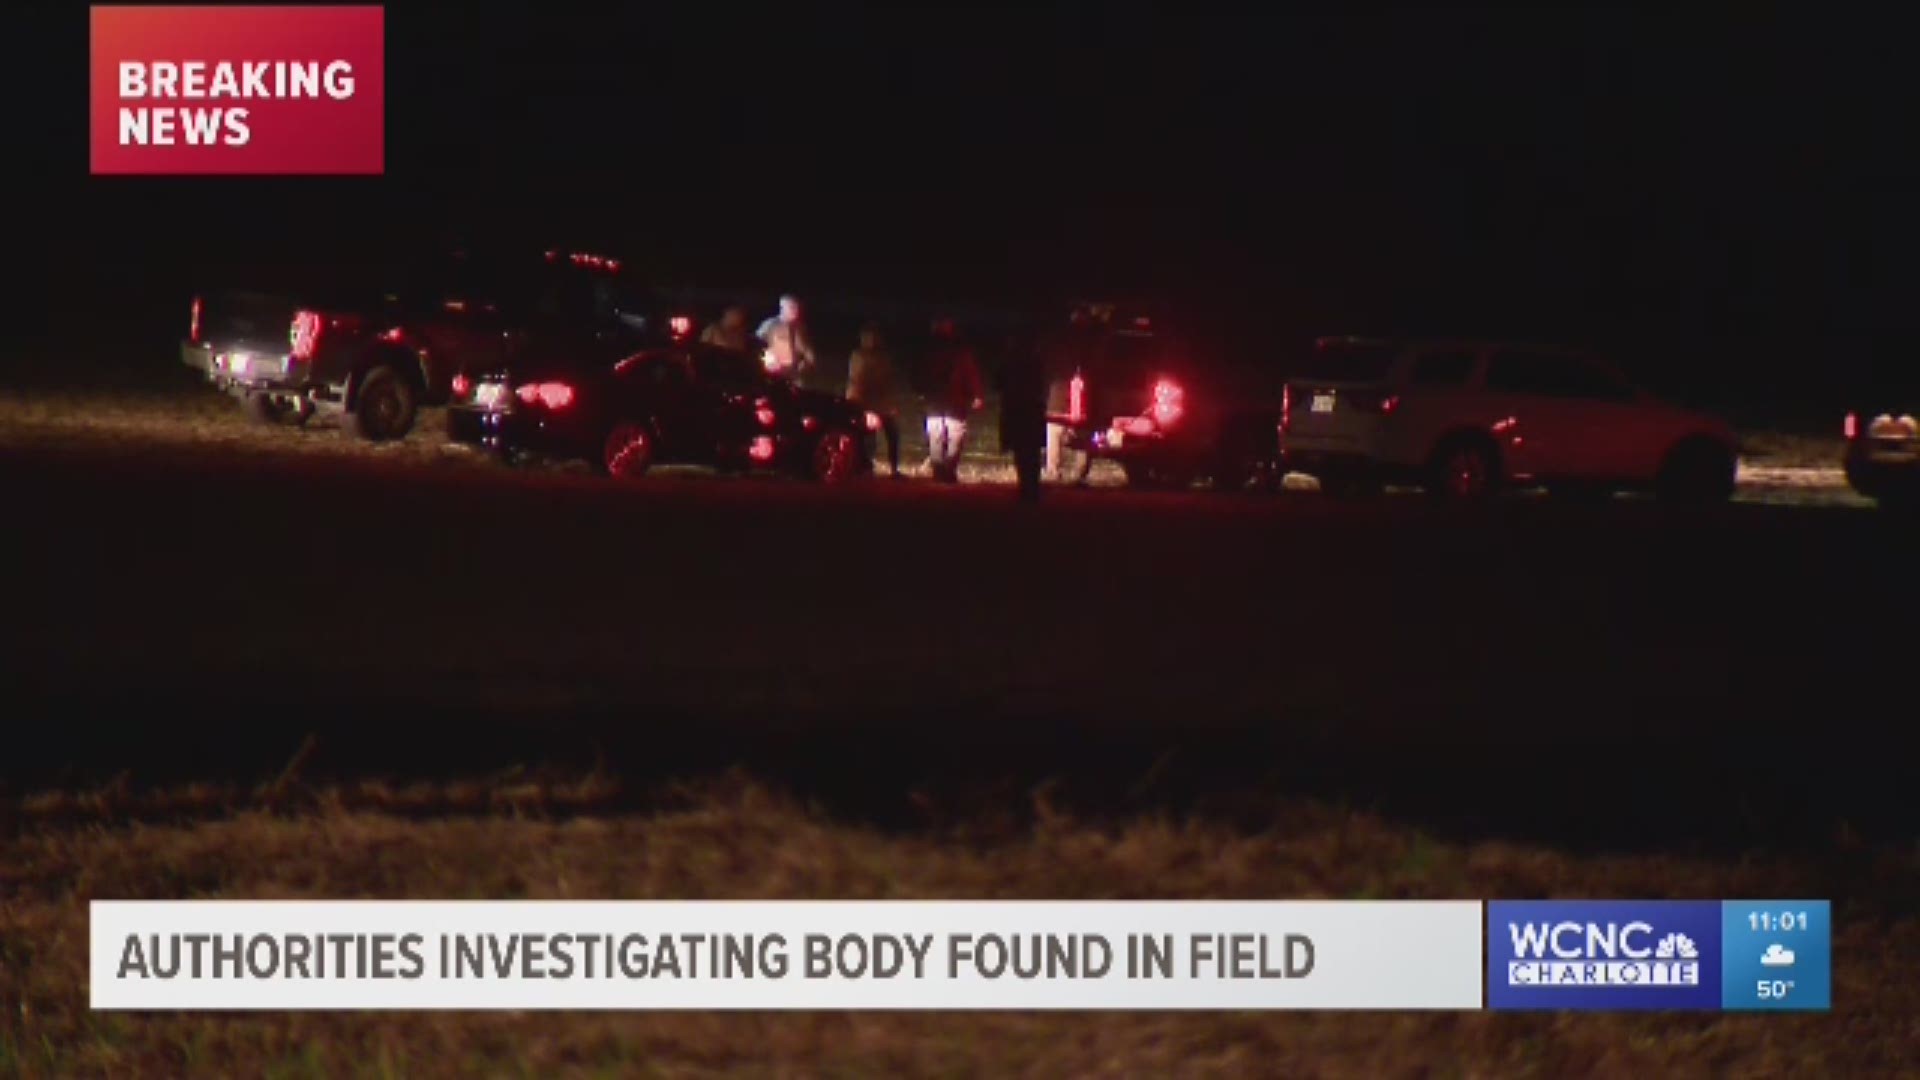 Sheriff's deputies say the body was found in a field off McManus Road near Latham Road in Monroe on Monday afternoon.